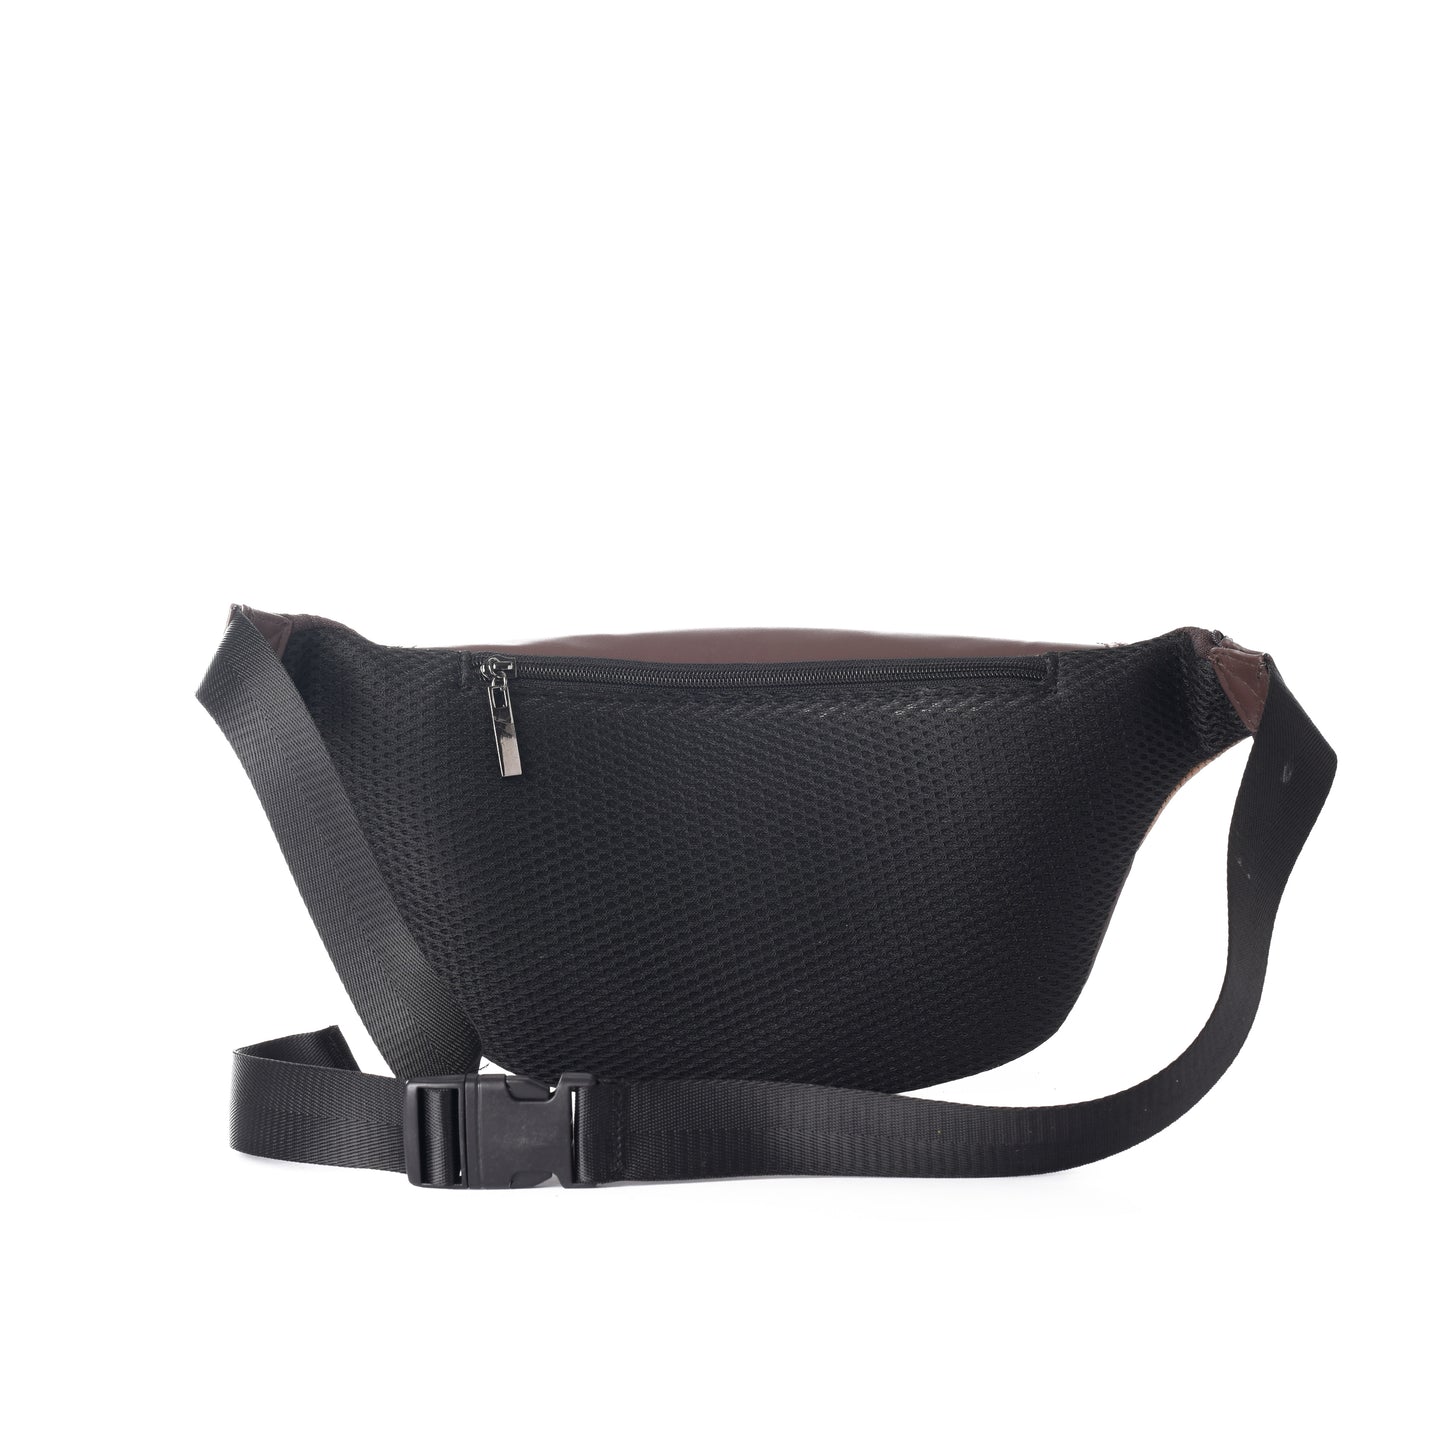 Fanny pack - Brown with cafe suede